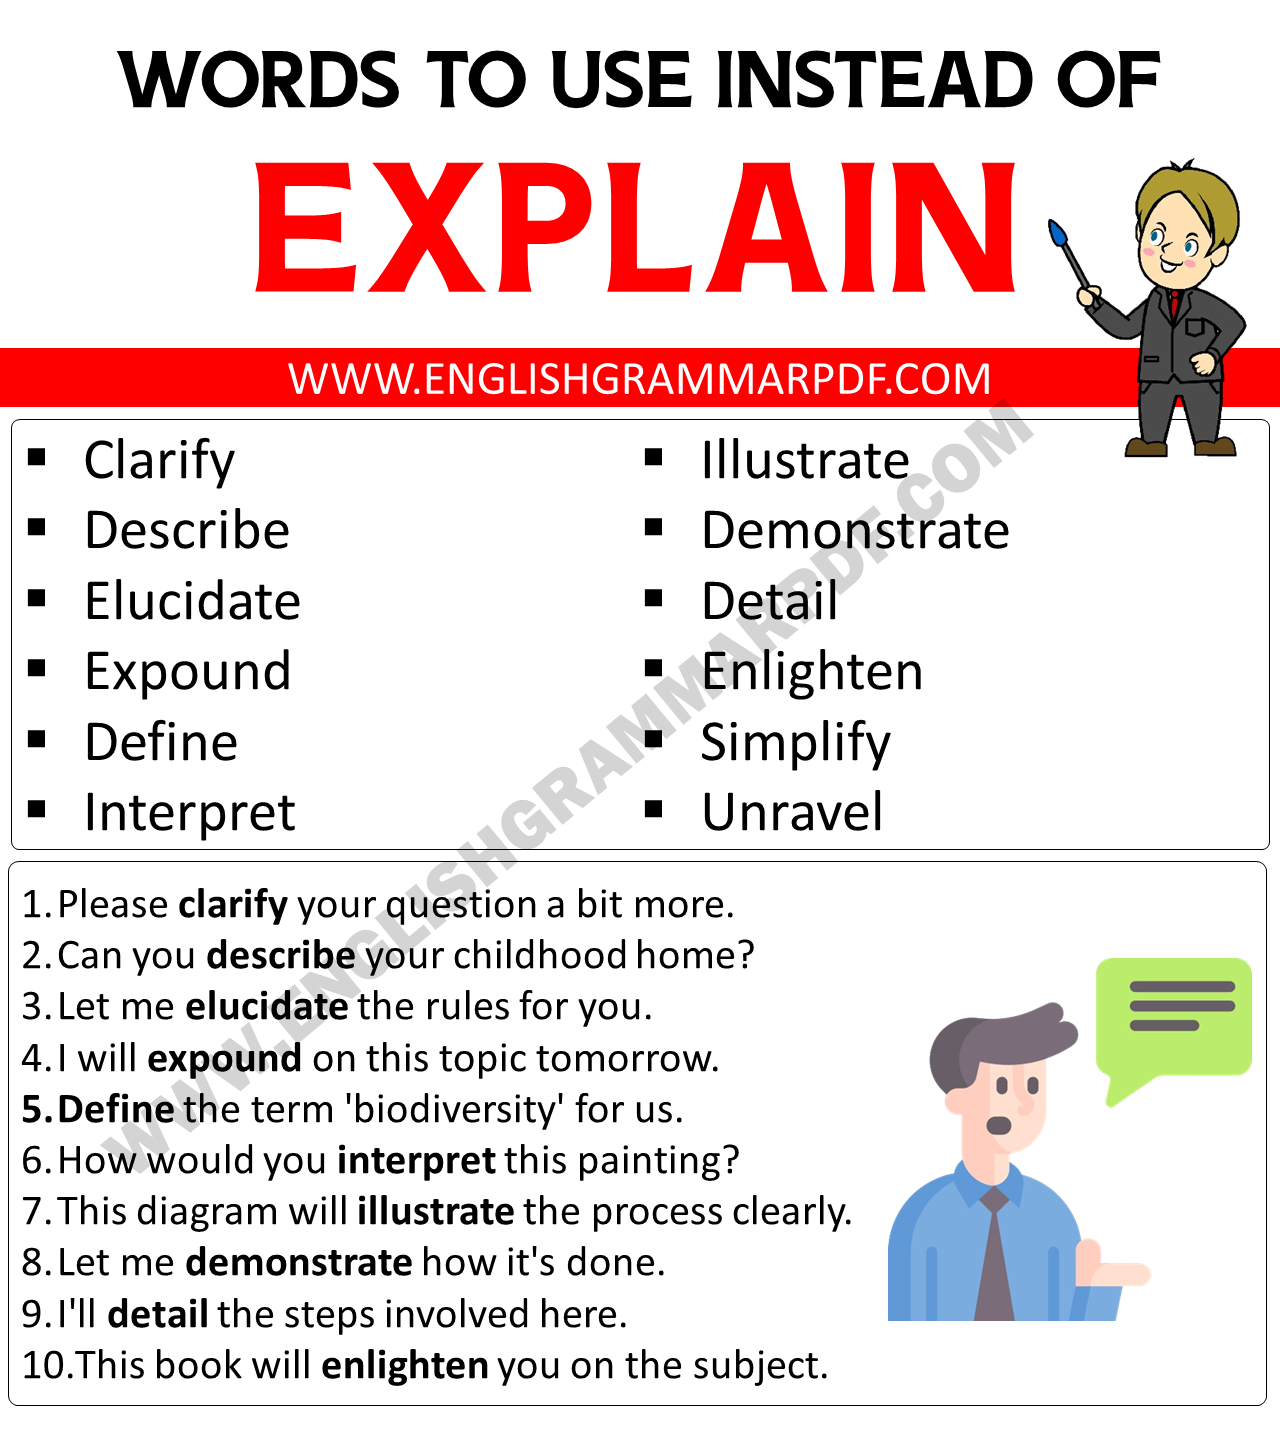 Using Synonyms of Explain in Sentences